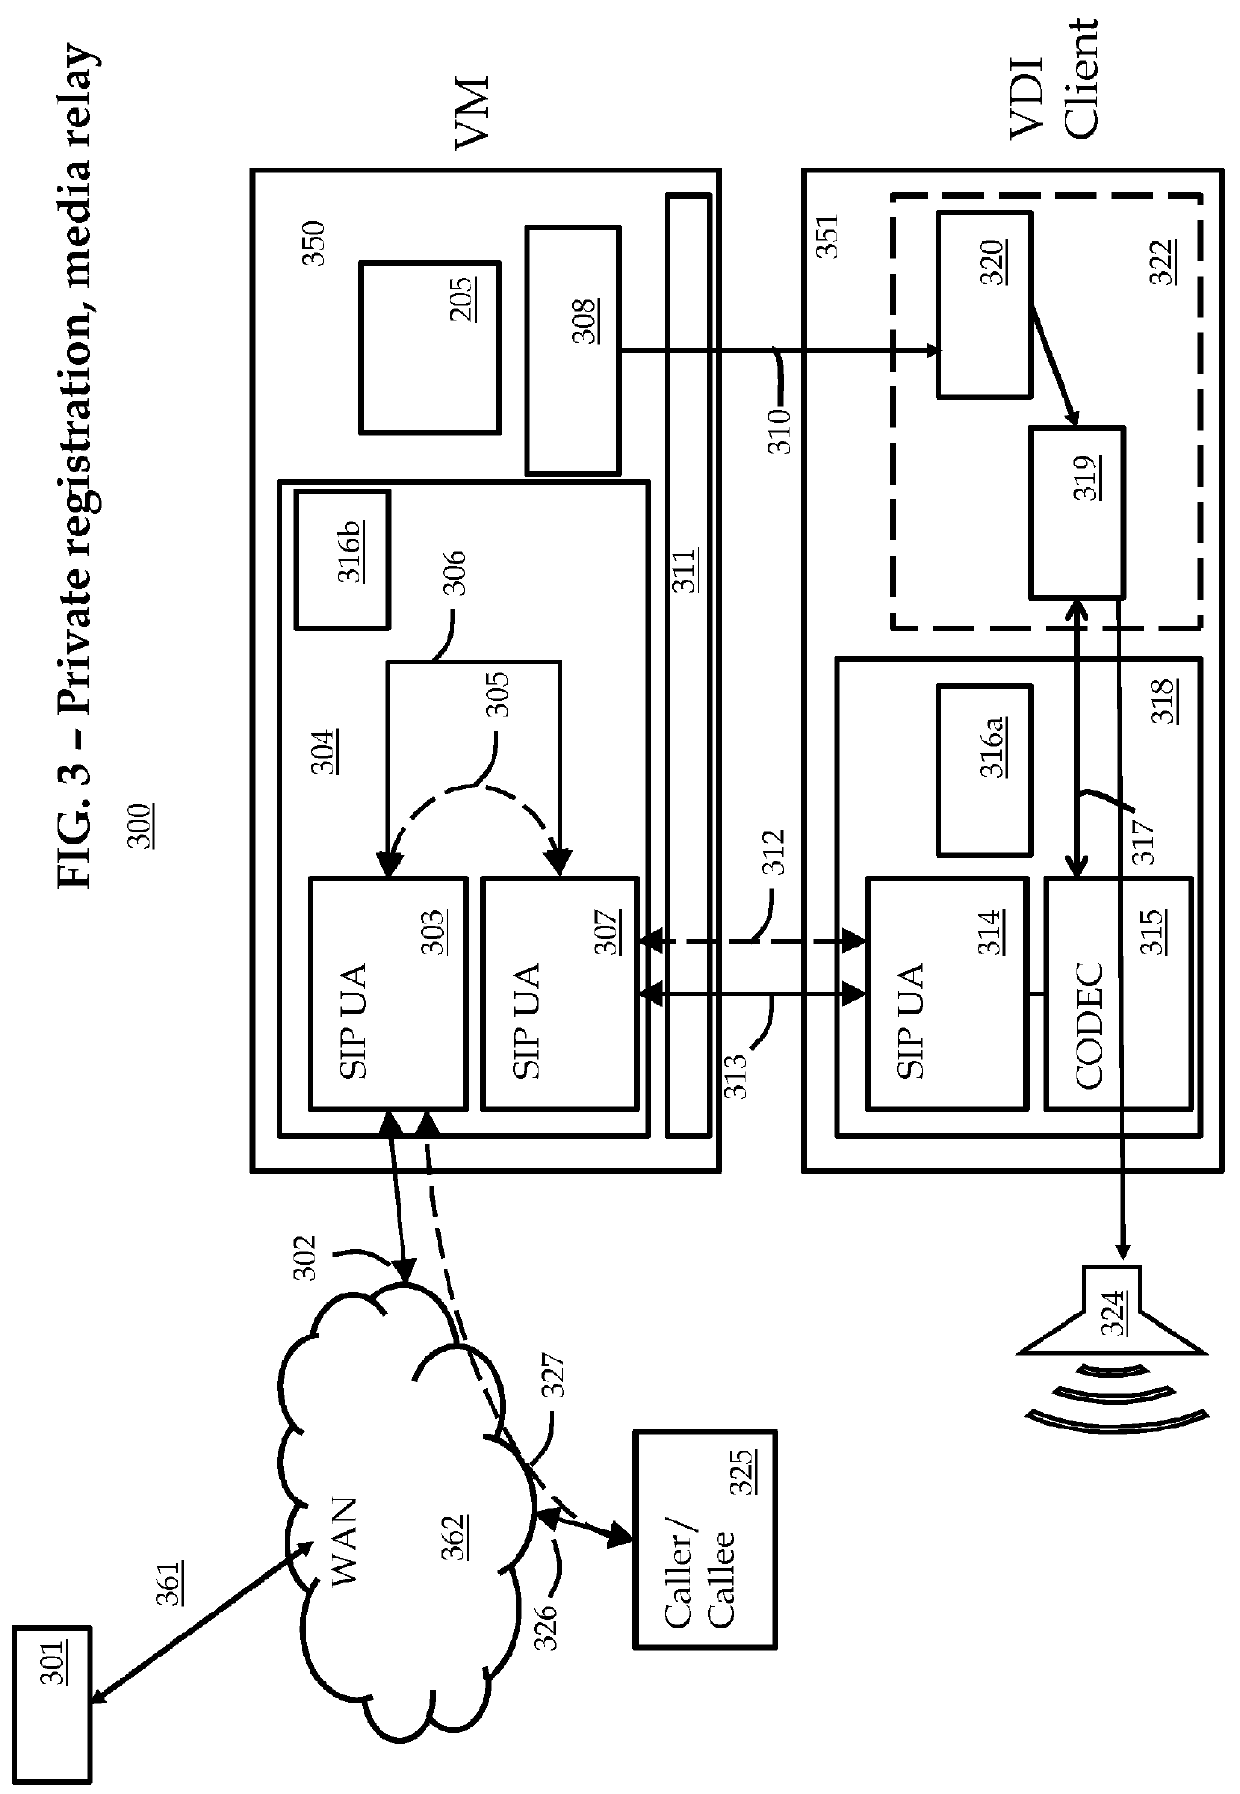 System and method for assuring quality real-time communication experience in virtual machine